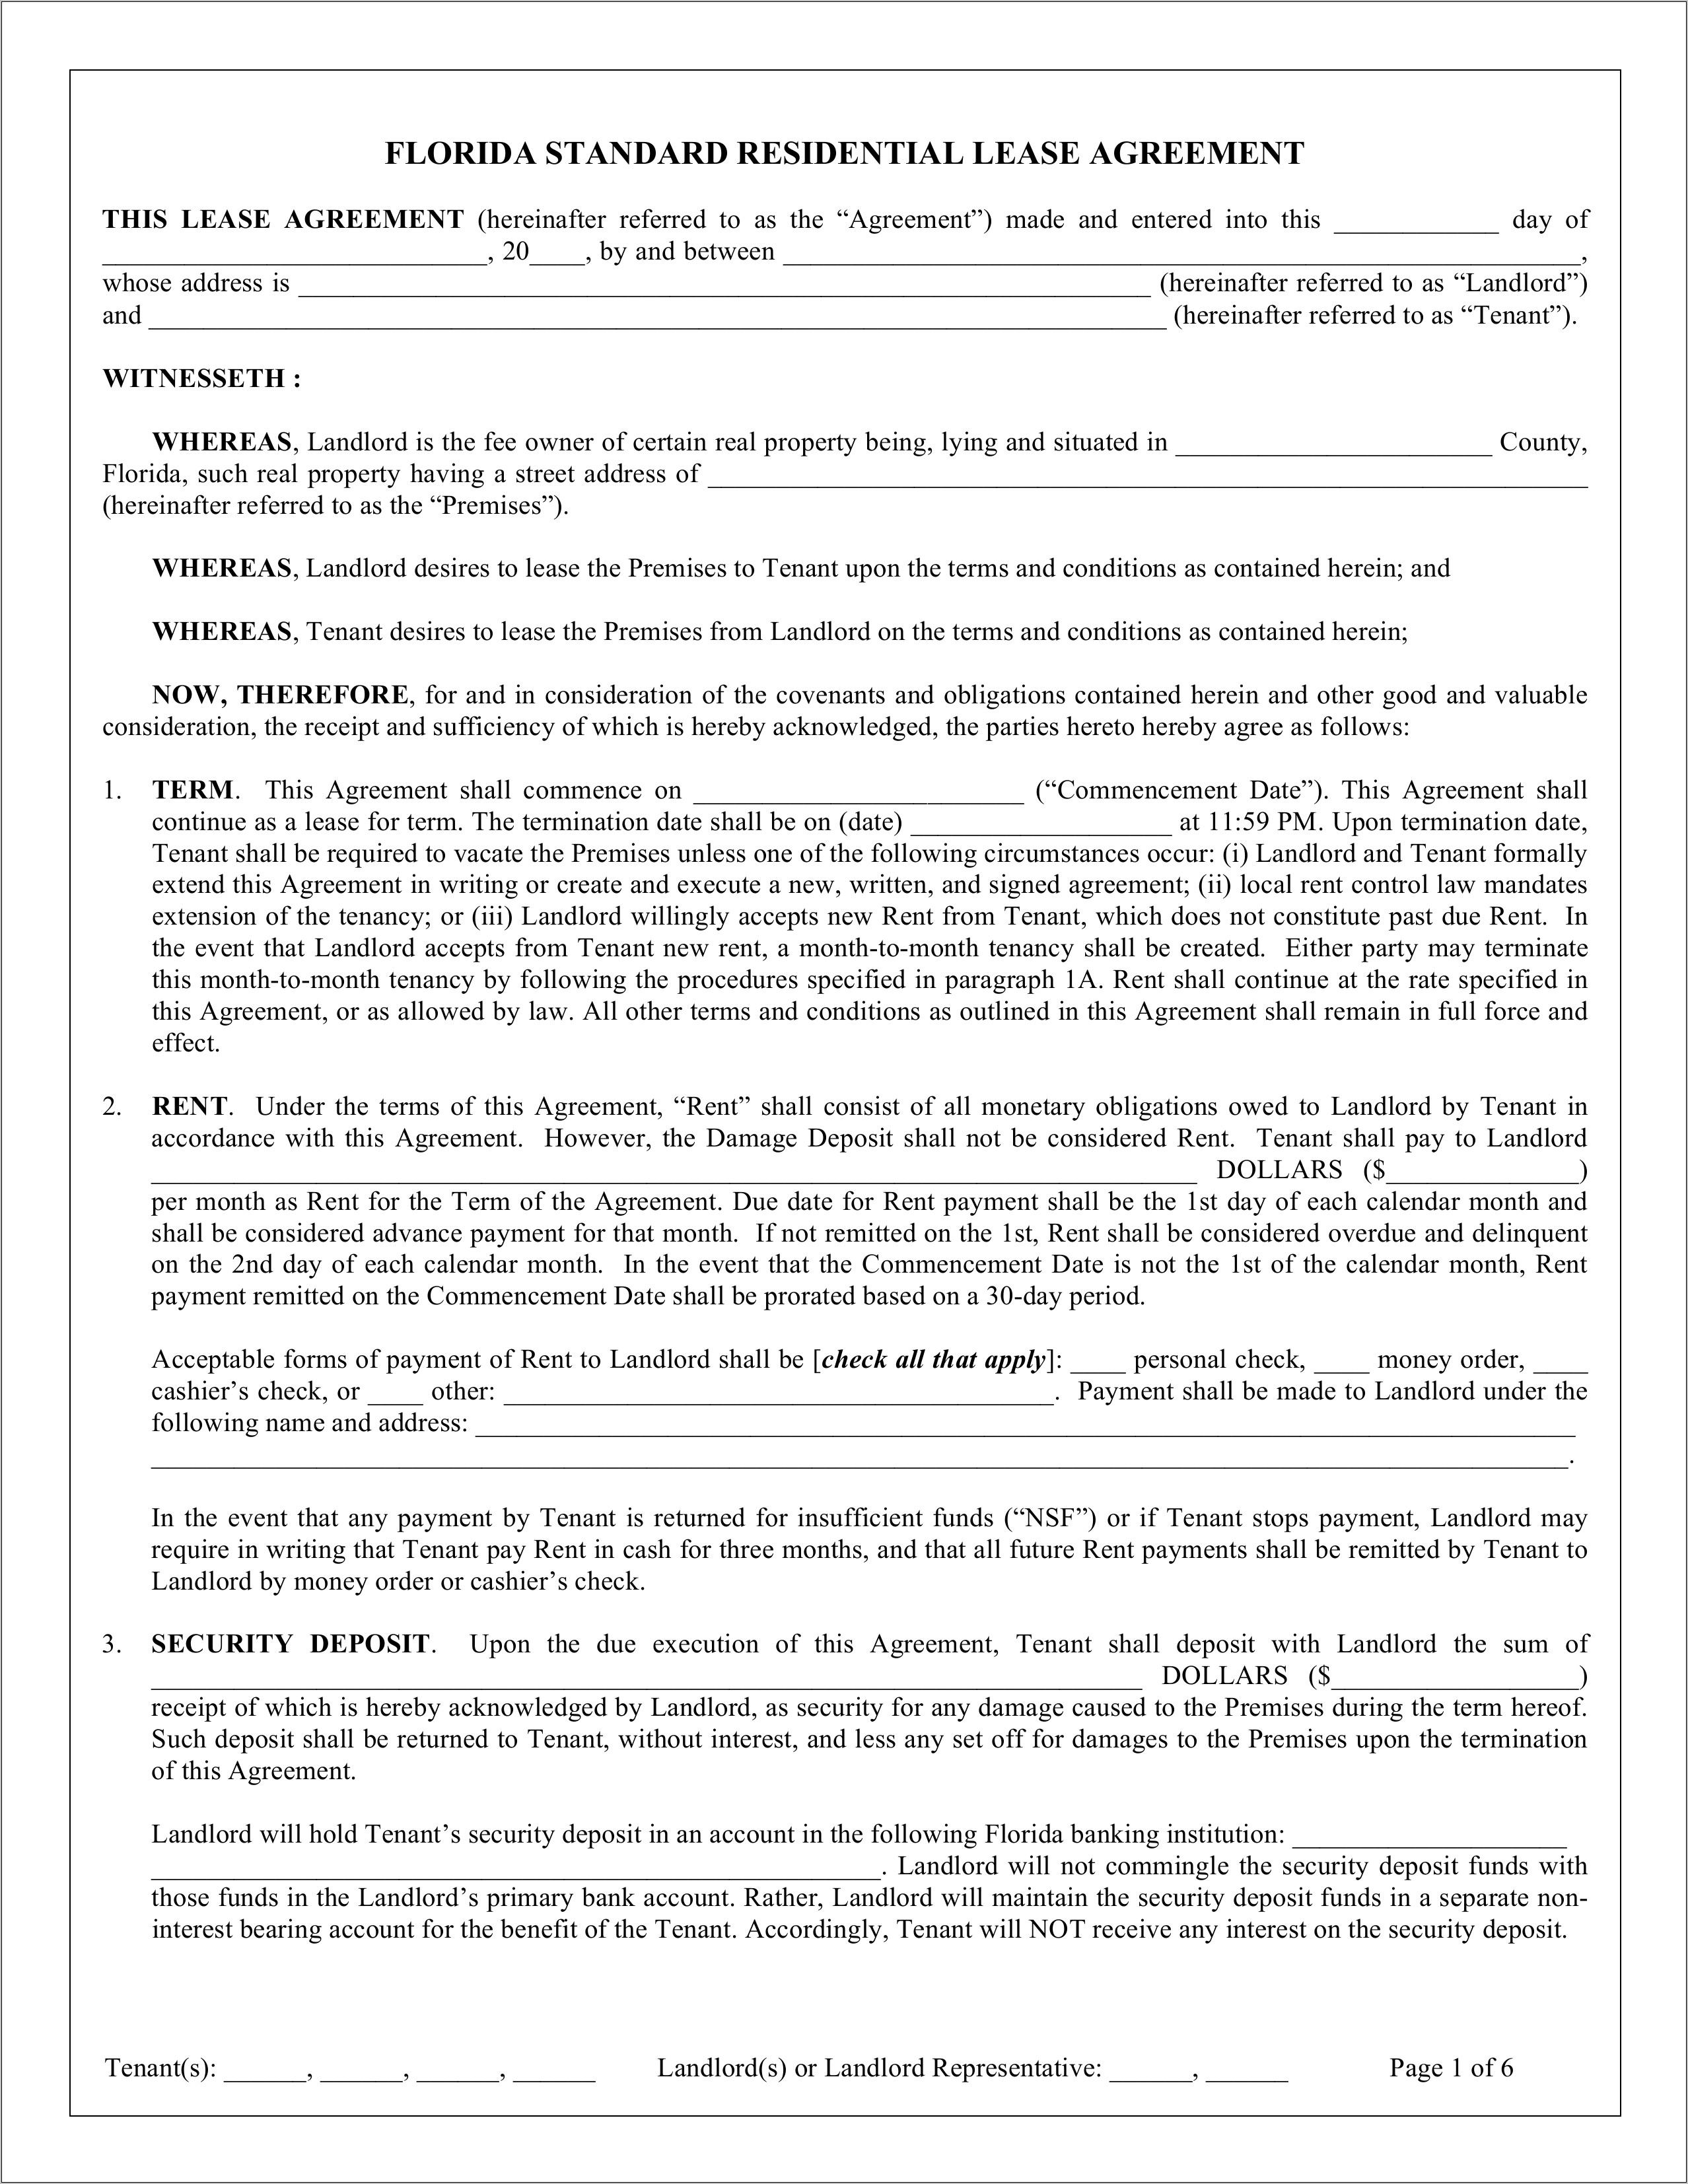 Residential Lease Agreement Template Florida